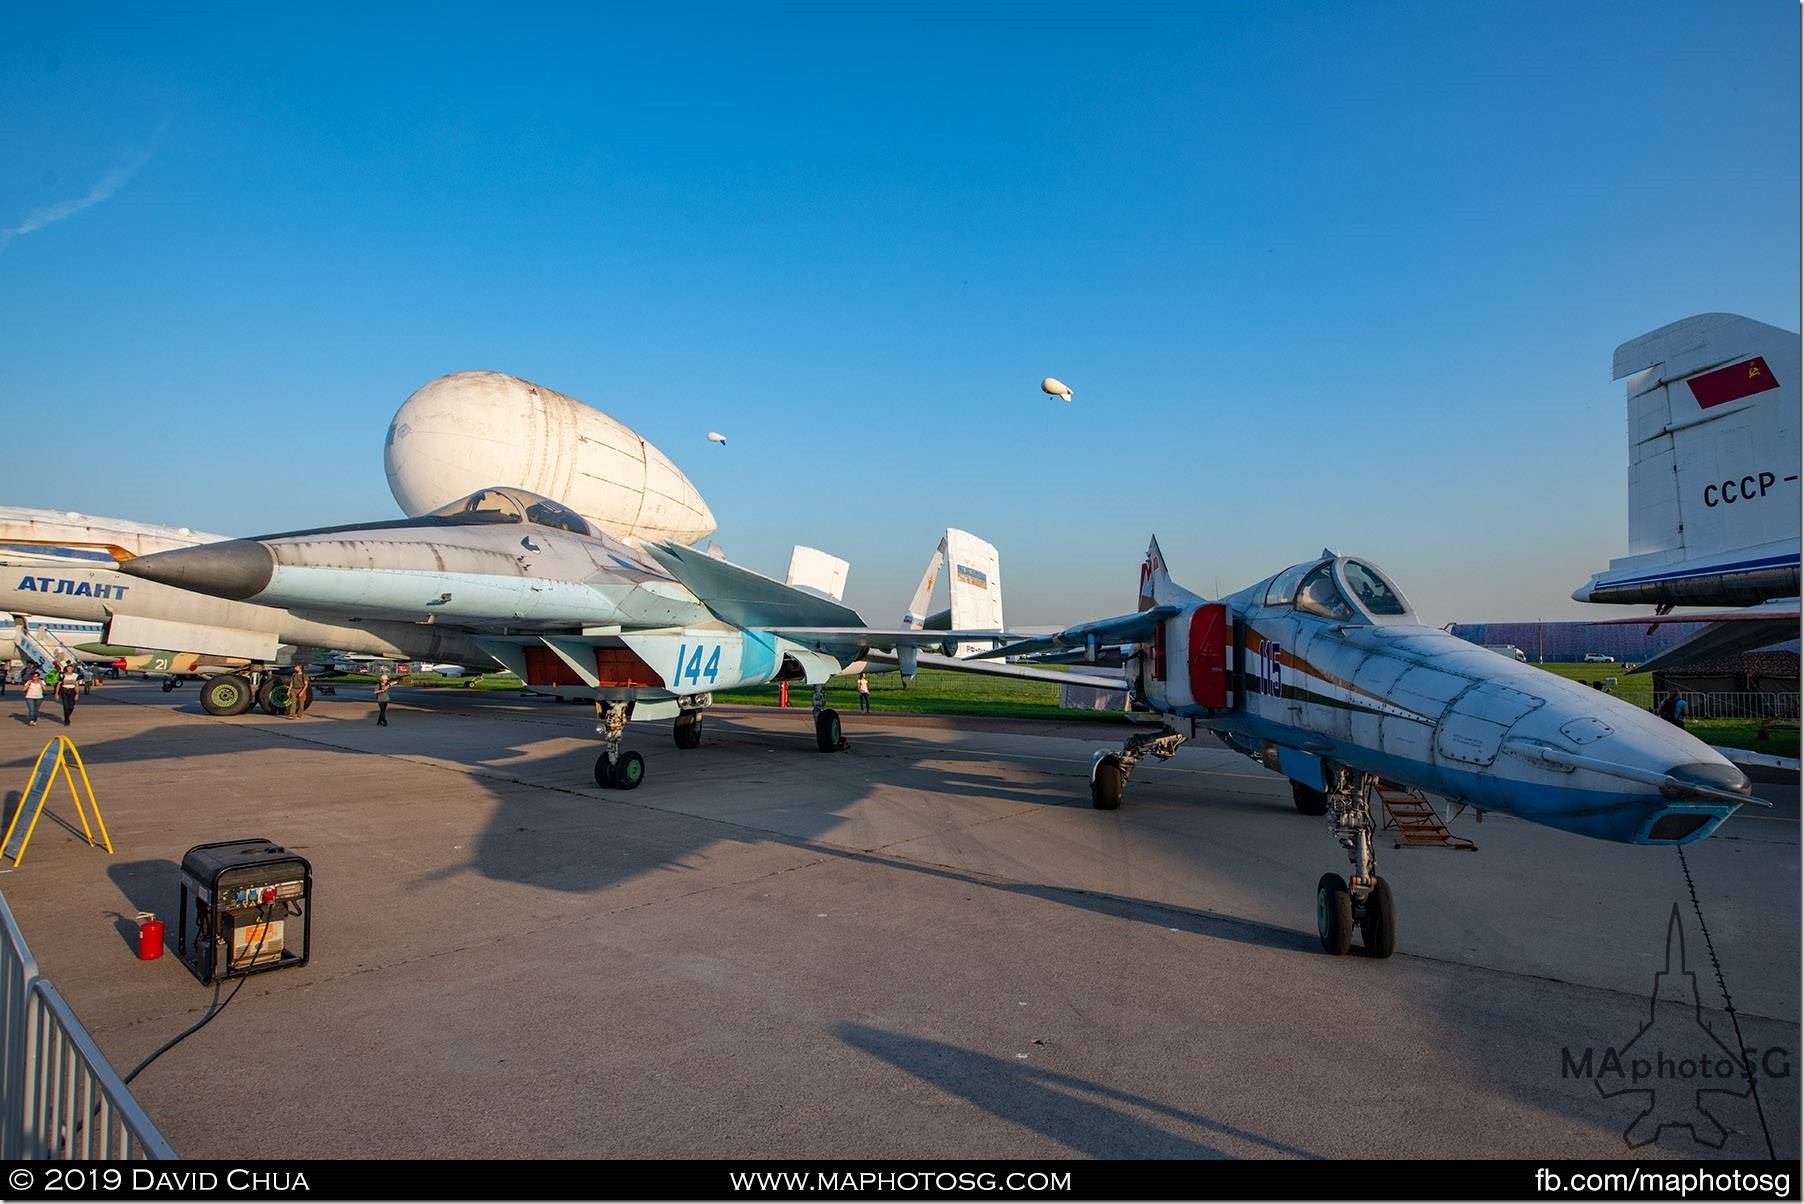 Mikoyan Project 1.44 on the left and Gromov Flight Research Institute Mikoyan-Gurevich MiG-27